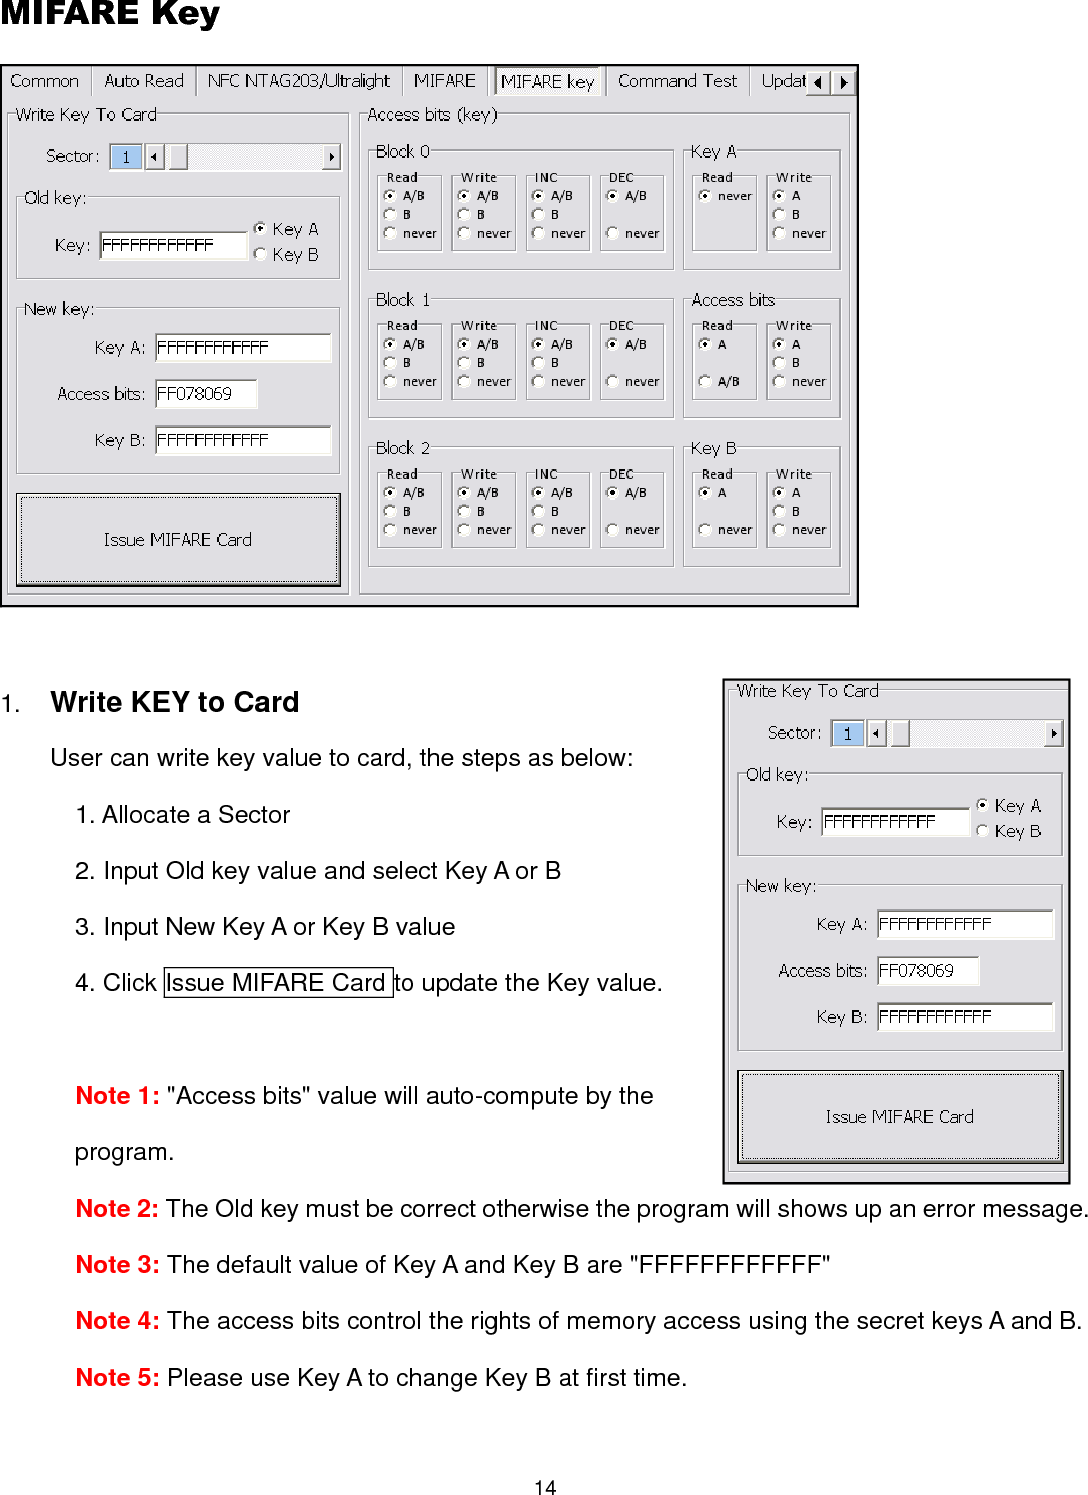 14  MIFARE Key   1. Write KEY to Card User can write key value to card, the steps as below:   1. Allocate a Sector 2. Input Old key value and select Key A or B 3. Input New Key A or Key B value 4. Click Issue MIFARE Card to update the Key value.    Note 1: &quot;Access bits&quot; value will auto-compute by the program. Note 2: The Old key must be correct otherwise the program will shows up an error message. Note 3: The default value of Key A and Key B are &quot;FFFFFFFFFFFF&quot; Note 4: The access bits control the rights of memory access using the secret keys A and B. Note 5: Please use Key A to change Key B at first time.  